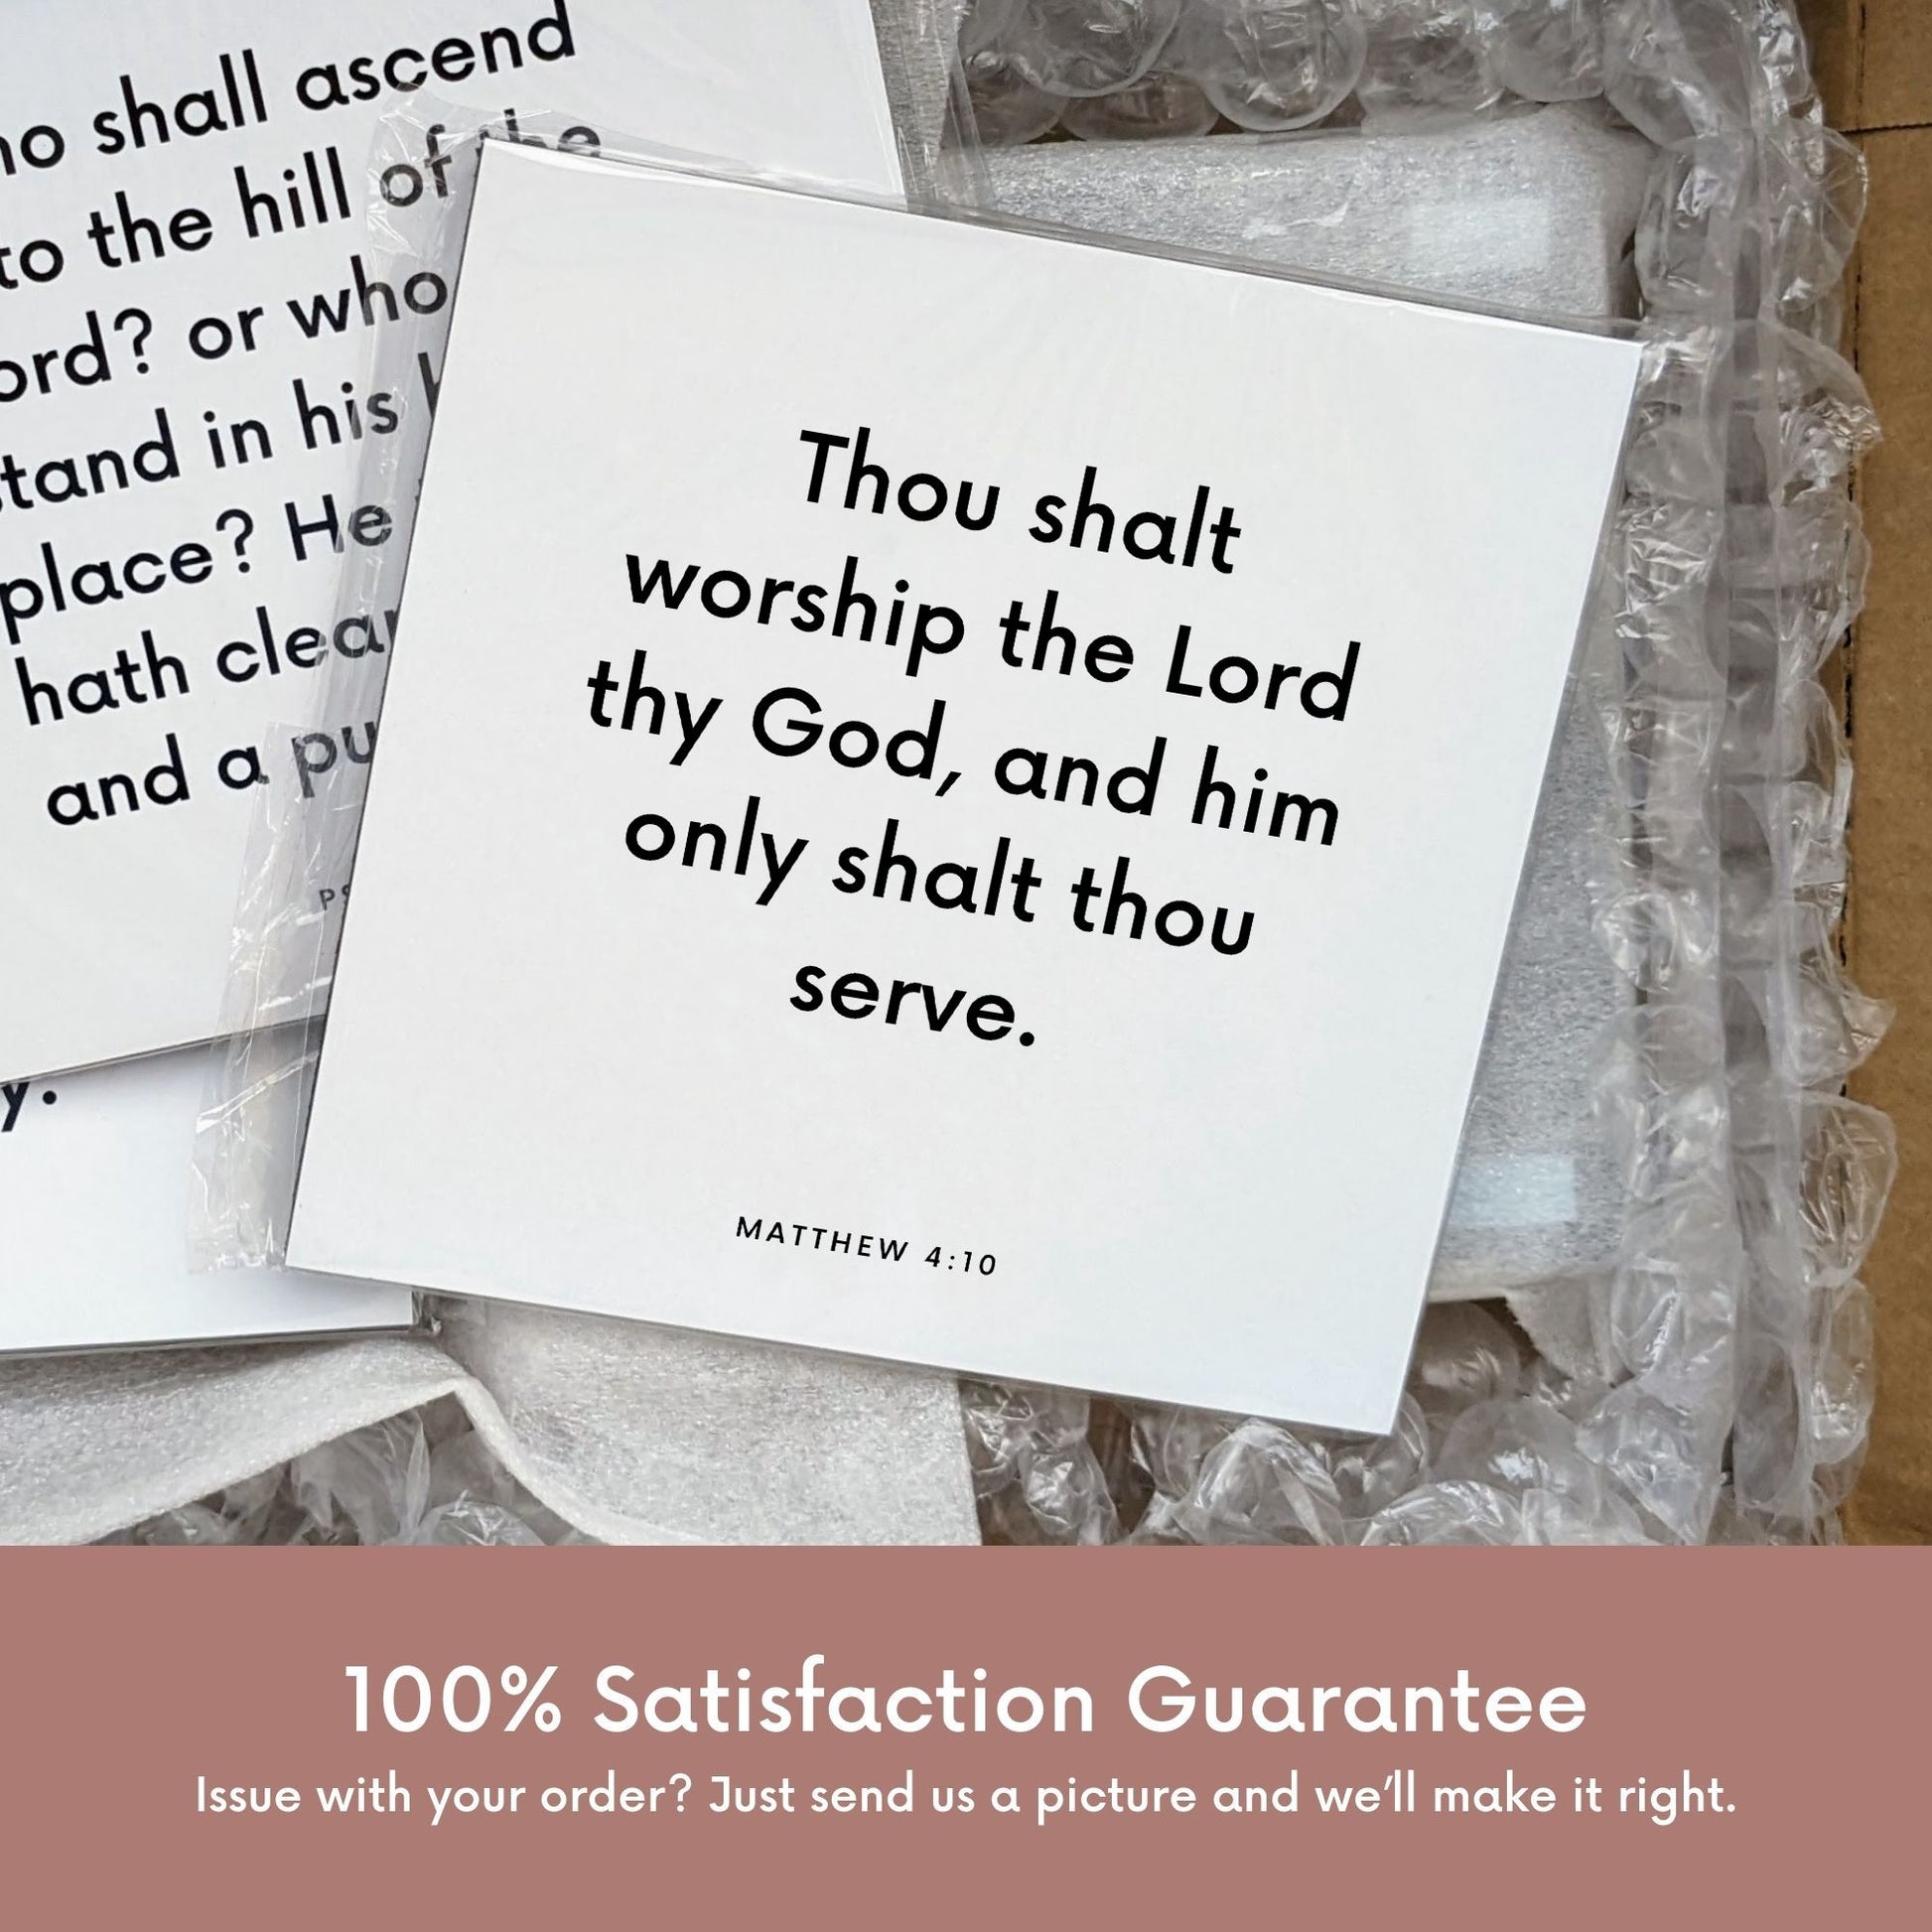 Shipping materials for scripture tile of Matthew 4:10 - "Thou shalt worship the Lord thy God"